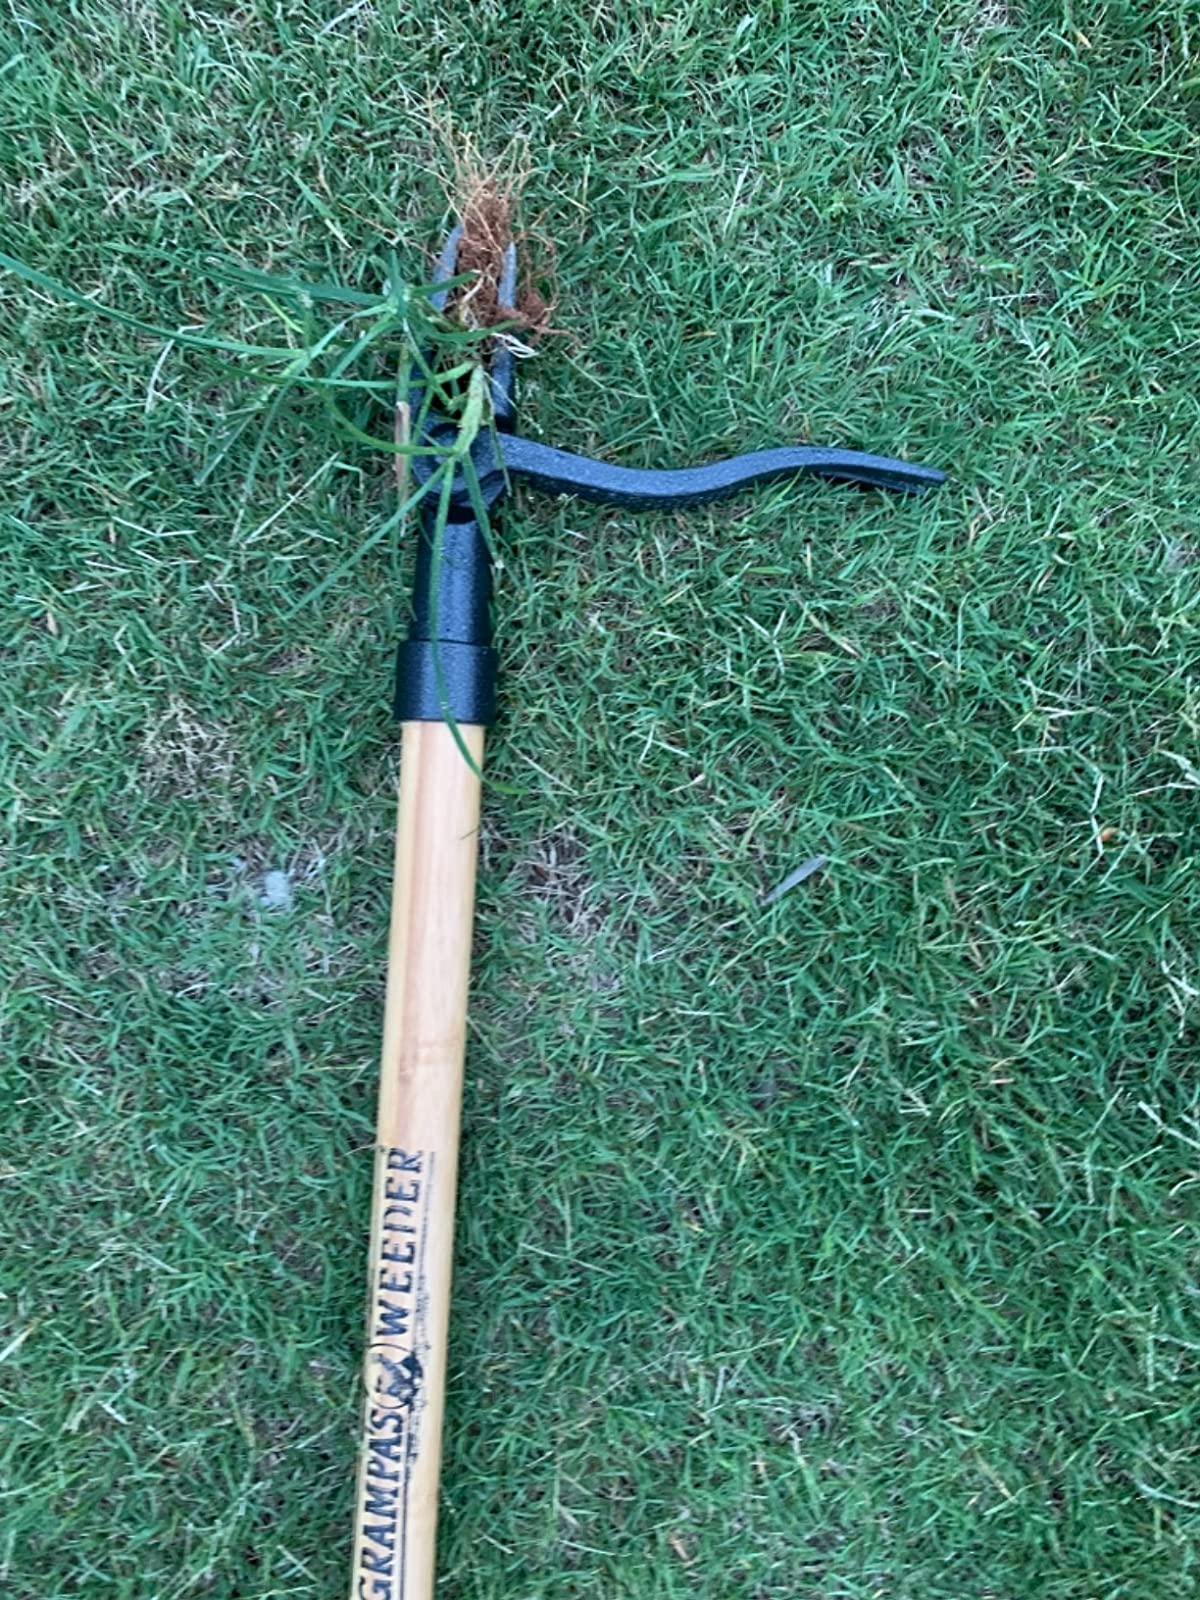 Stand Up Weed Puller Tool With Long Handle, Weeder Tool photo review